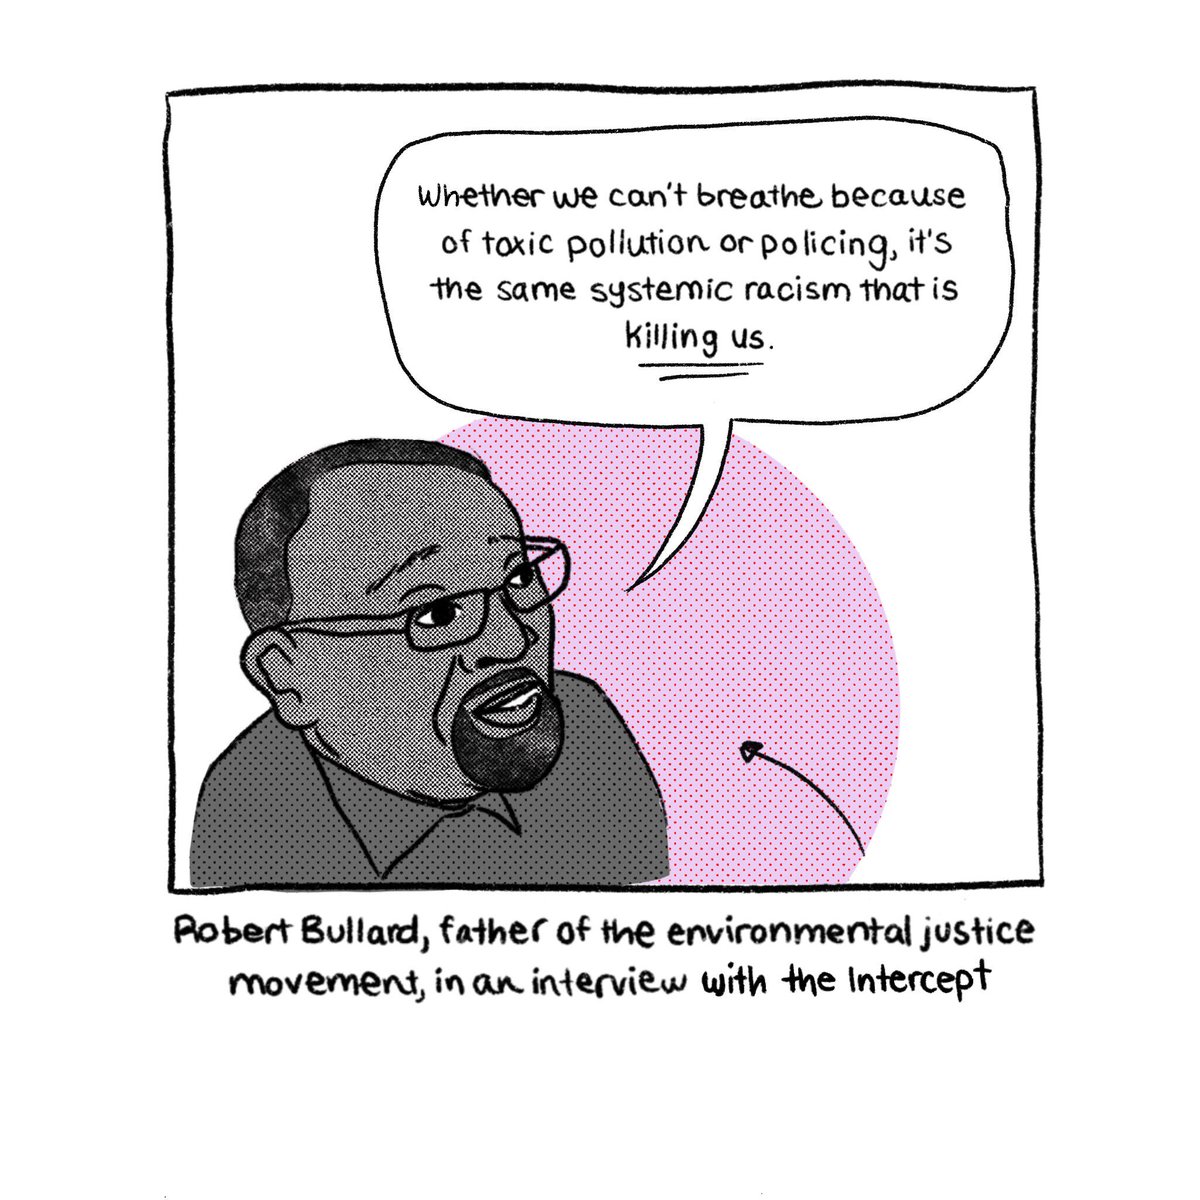 “Whether we can’t breathe because of toxic pollution or policing, it’s the same systemic racism that is killing us.” -  @DrBobBullard in  @theintercept (3/9)  https://theintercept.com/2020/06/17/coronavirus-environmental-justice-racism-robert-bullard/